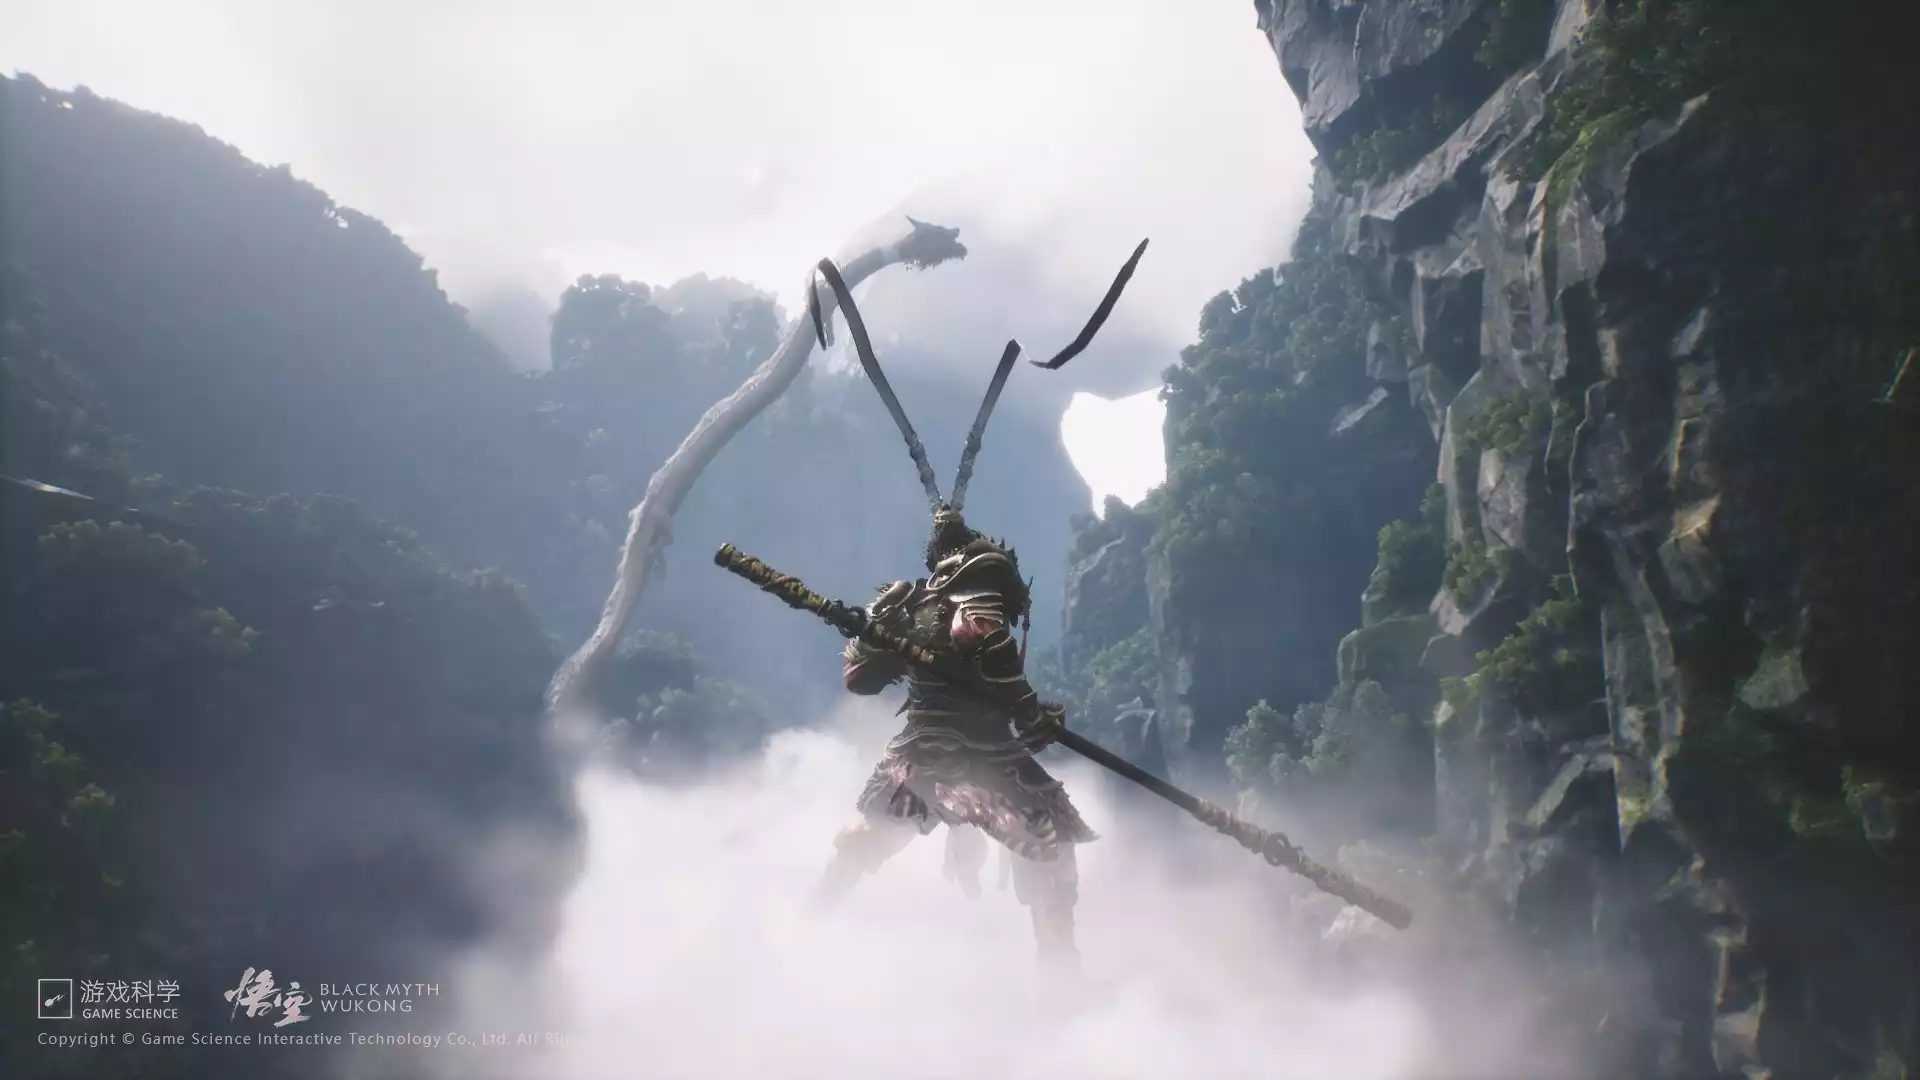 Black Myth: Wukong - Release window, trailers, gameplay & more